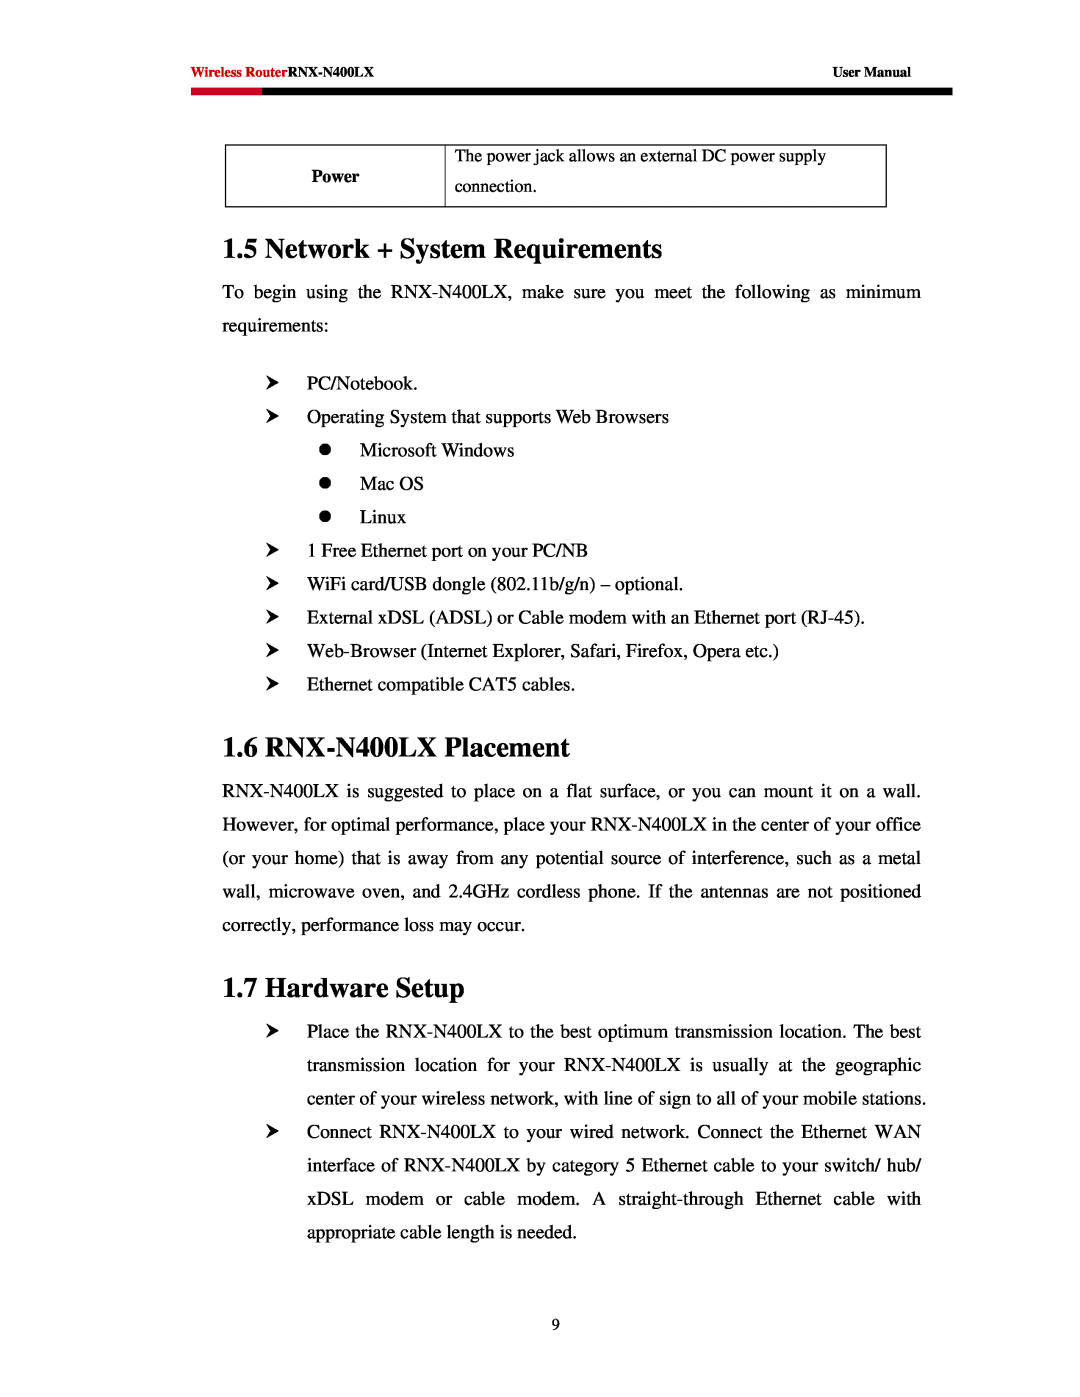 Rosewill user manual Network + System Requirements, RNX-N400LX Placement, Hardware Setup 